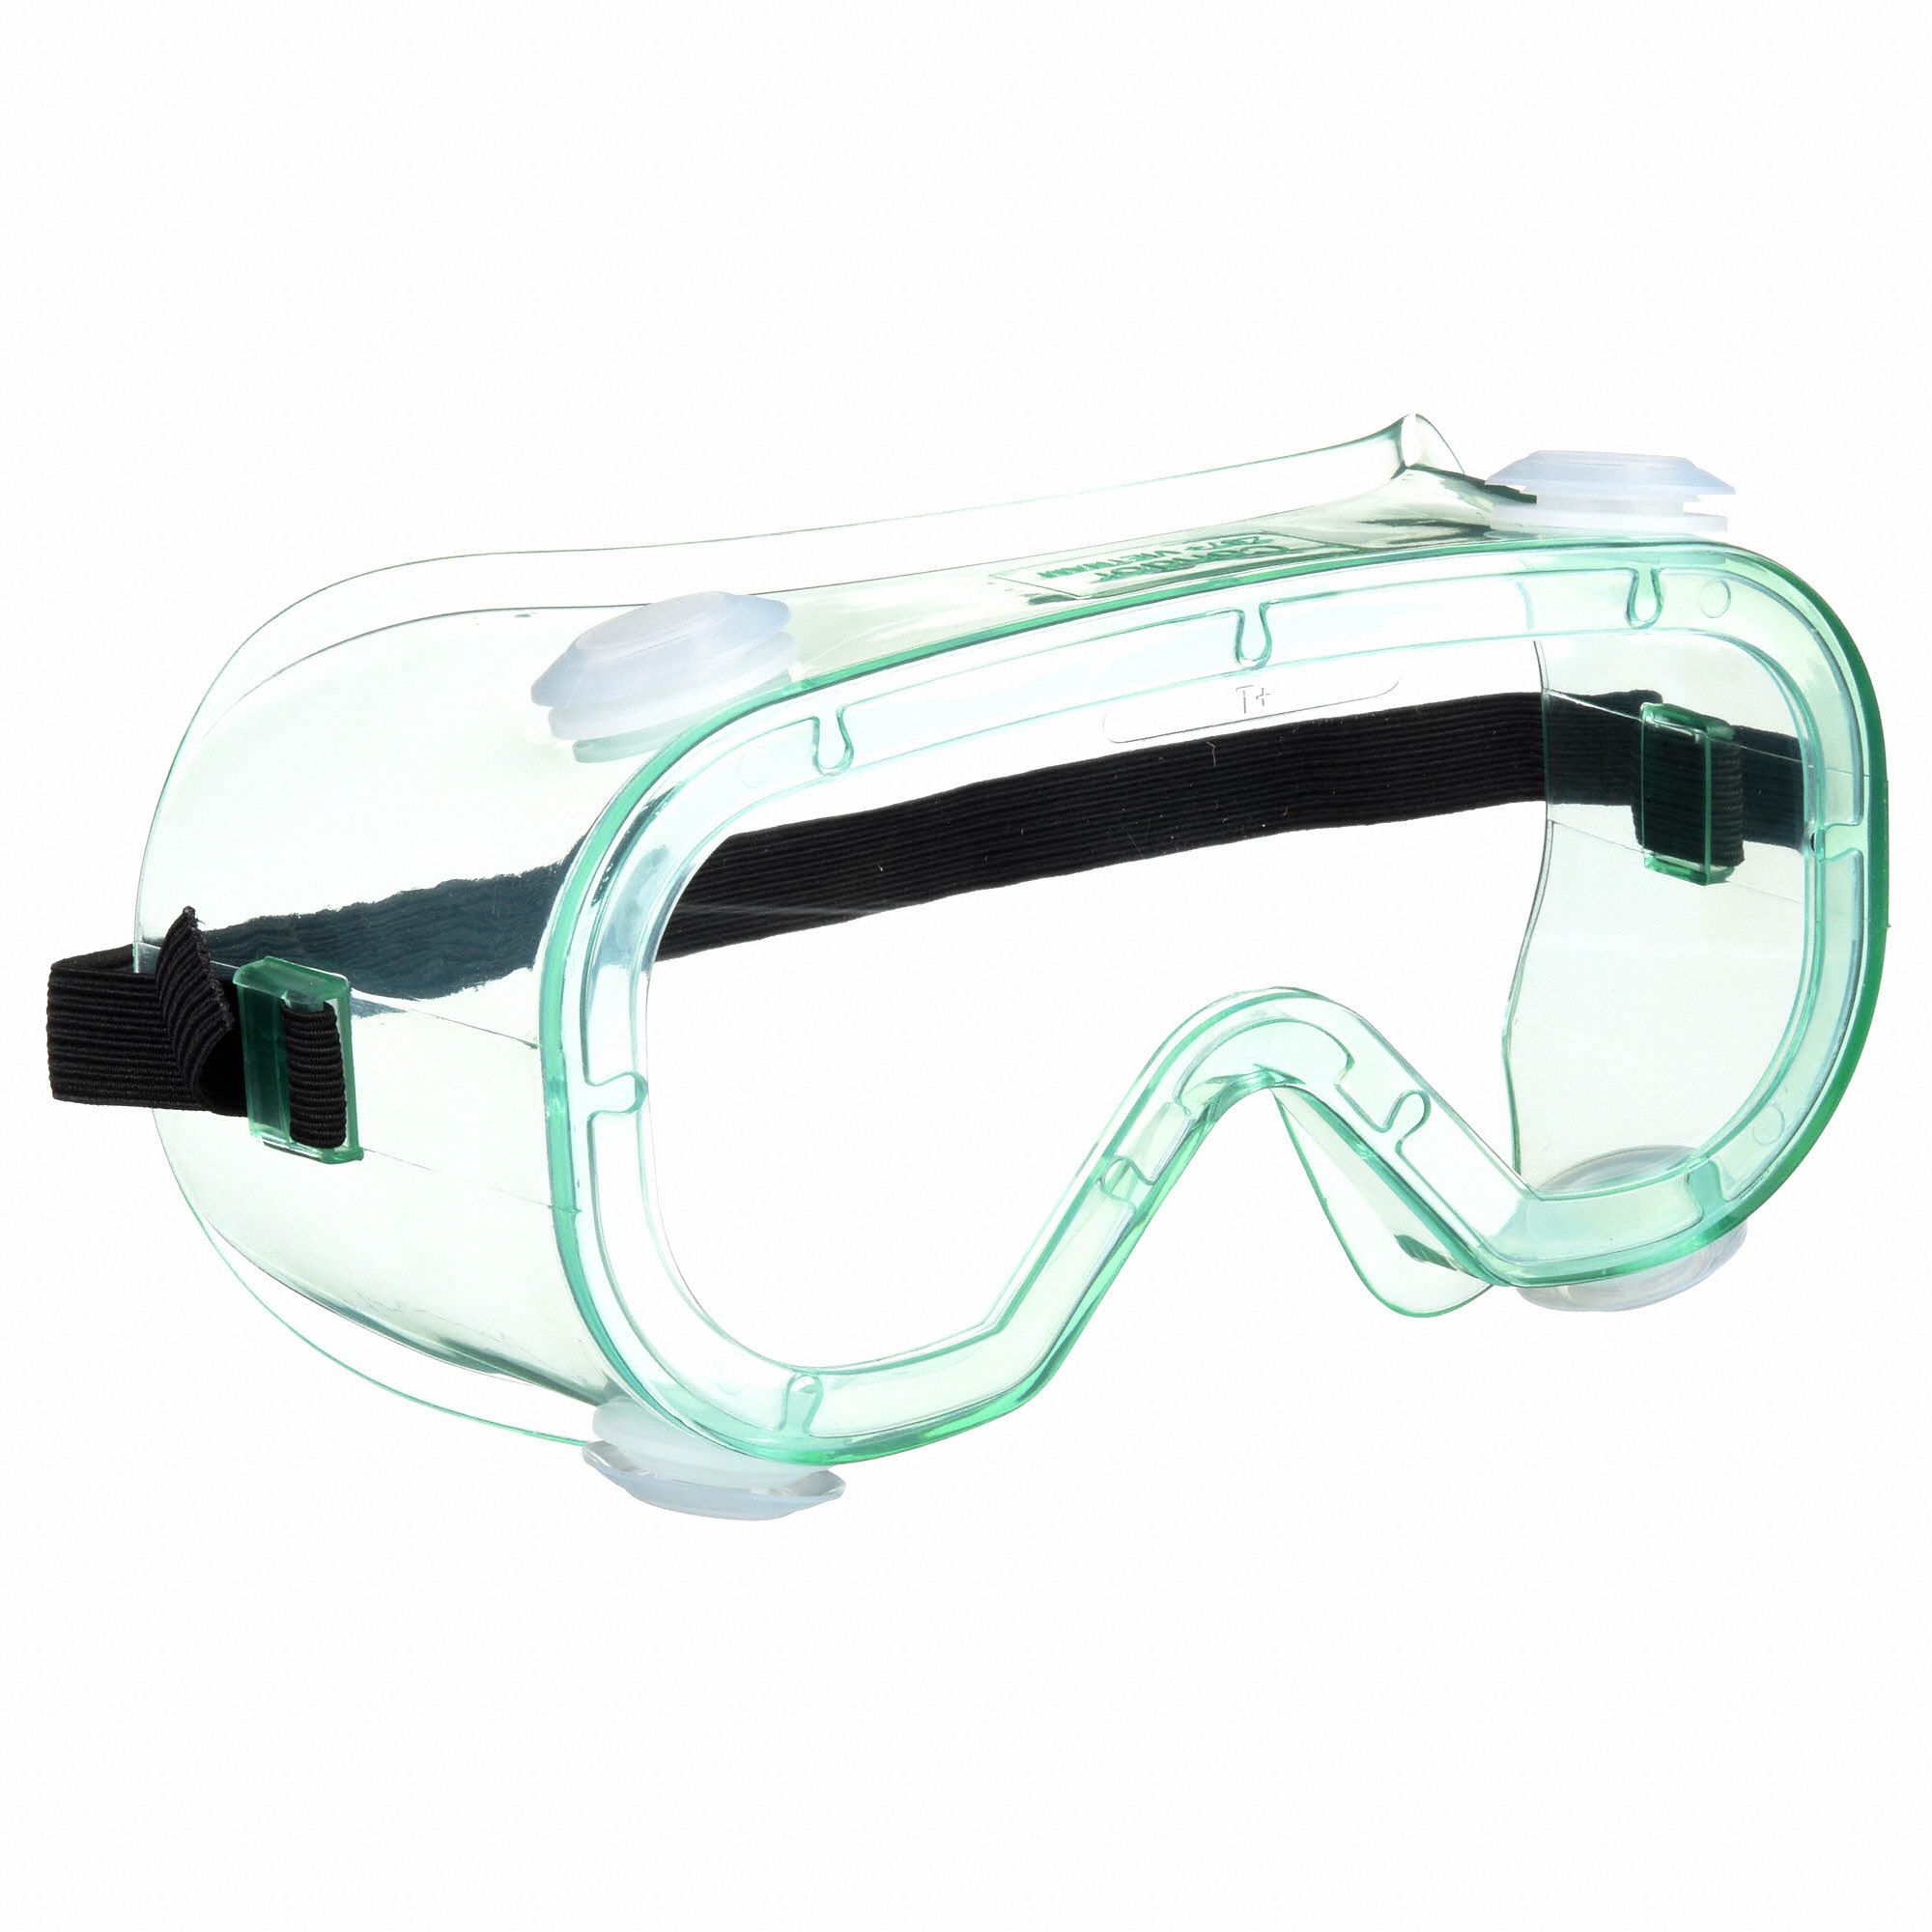 Safety goggle over Glasses lab Work eye Protective eyewear clean lens US Stock 